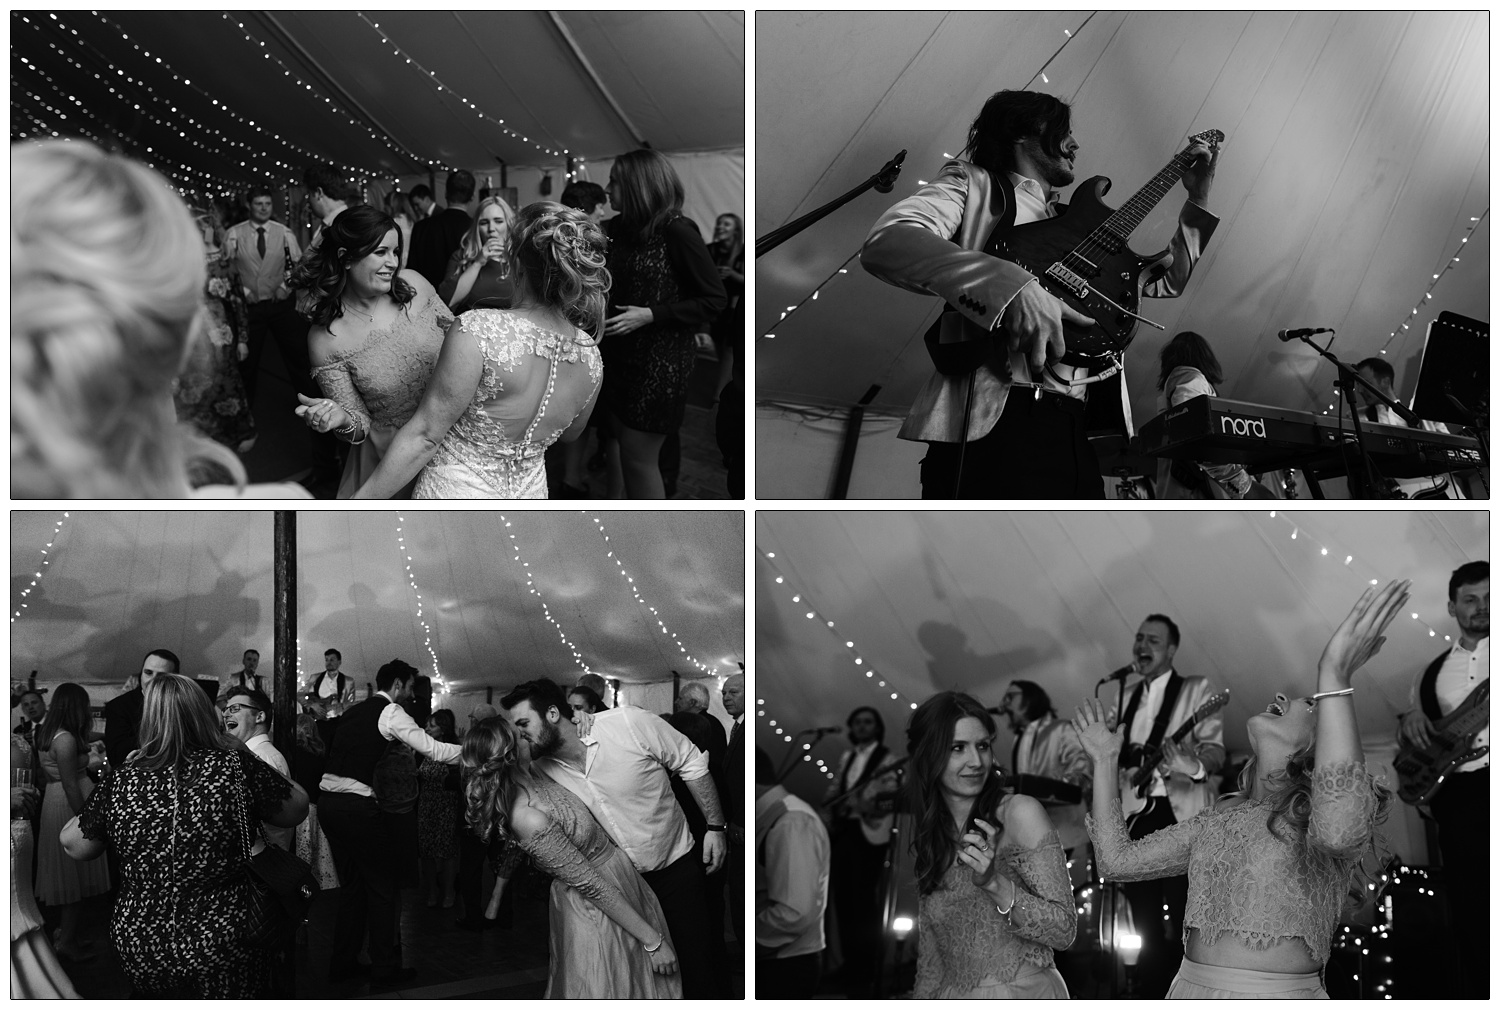 Bride and bridesmaids dancing in candid wedding reception photographs